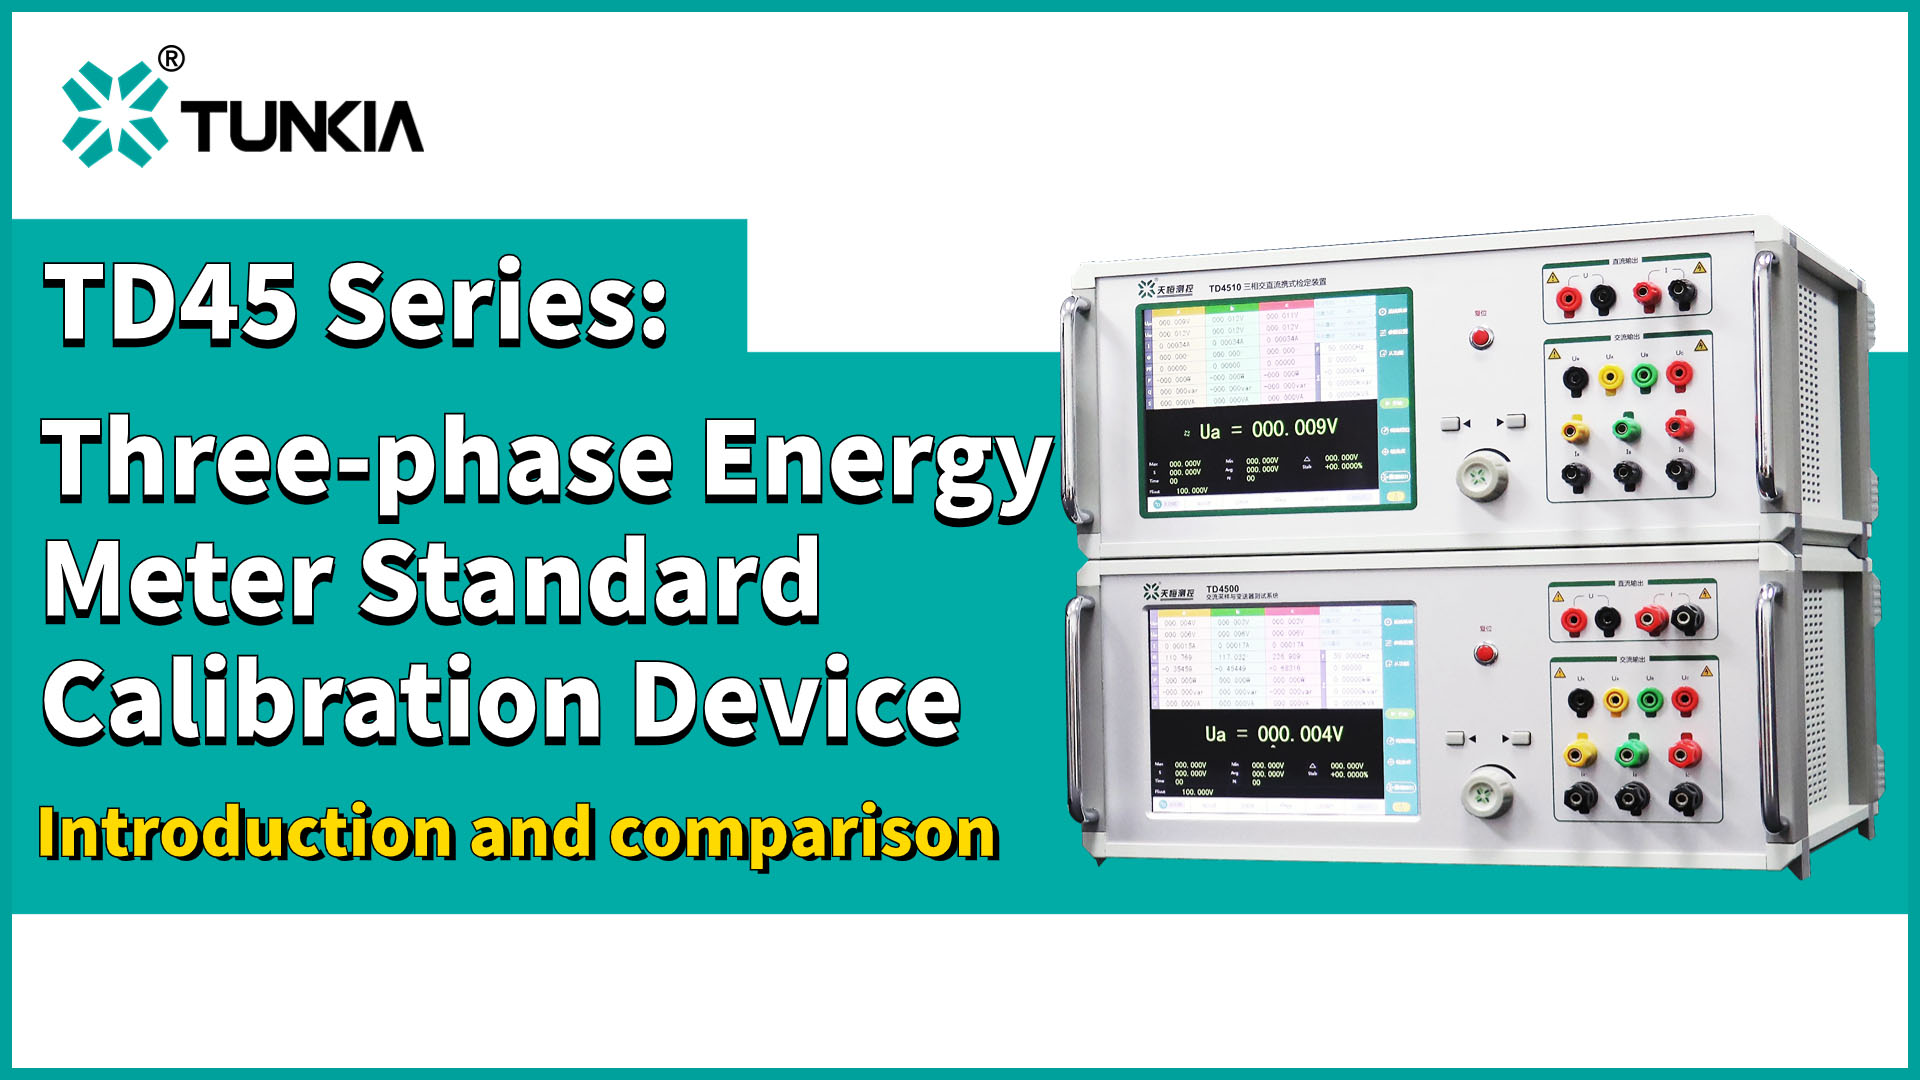 Three-phase Energy Meter Standard Calibration Device: Comprehensive Introduction to TD45 Series